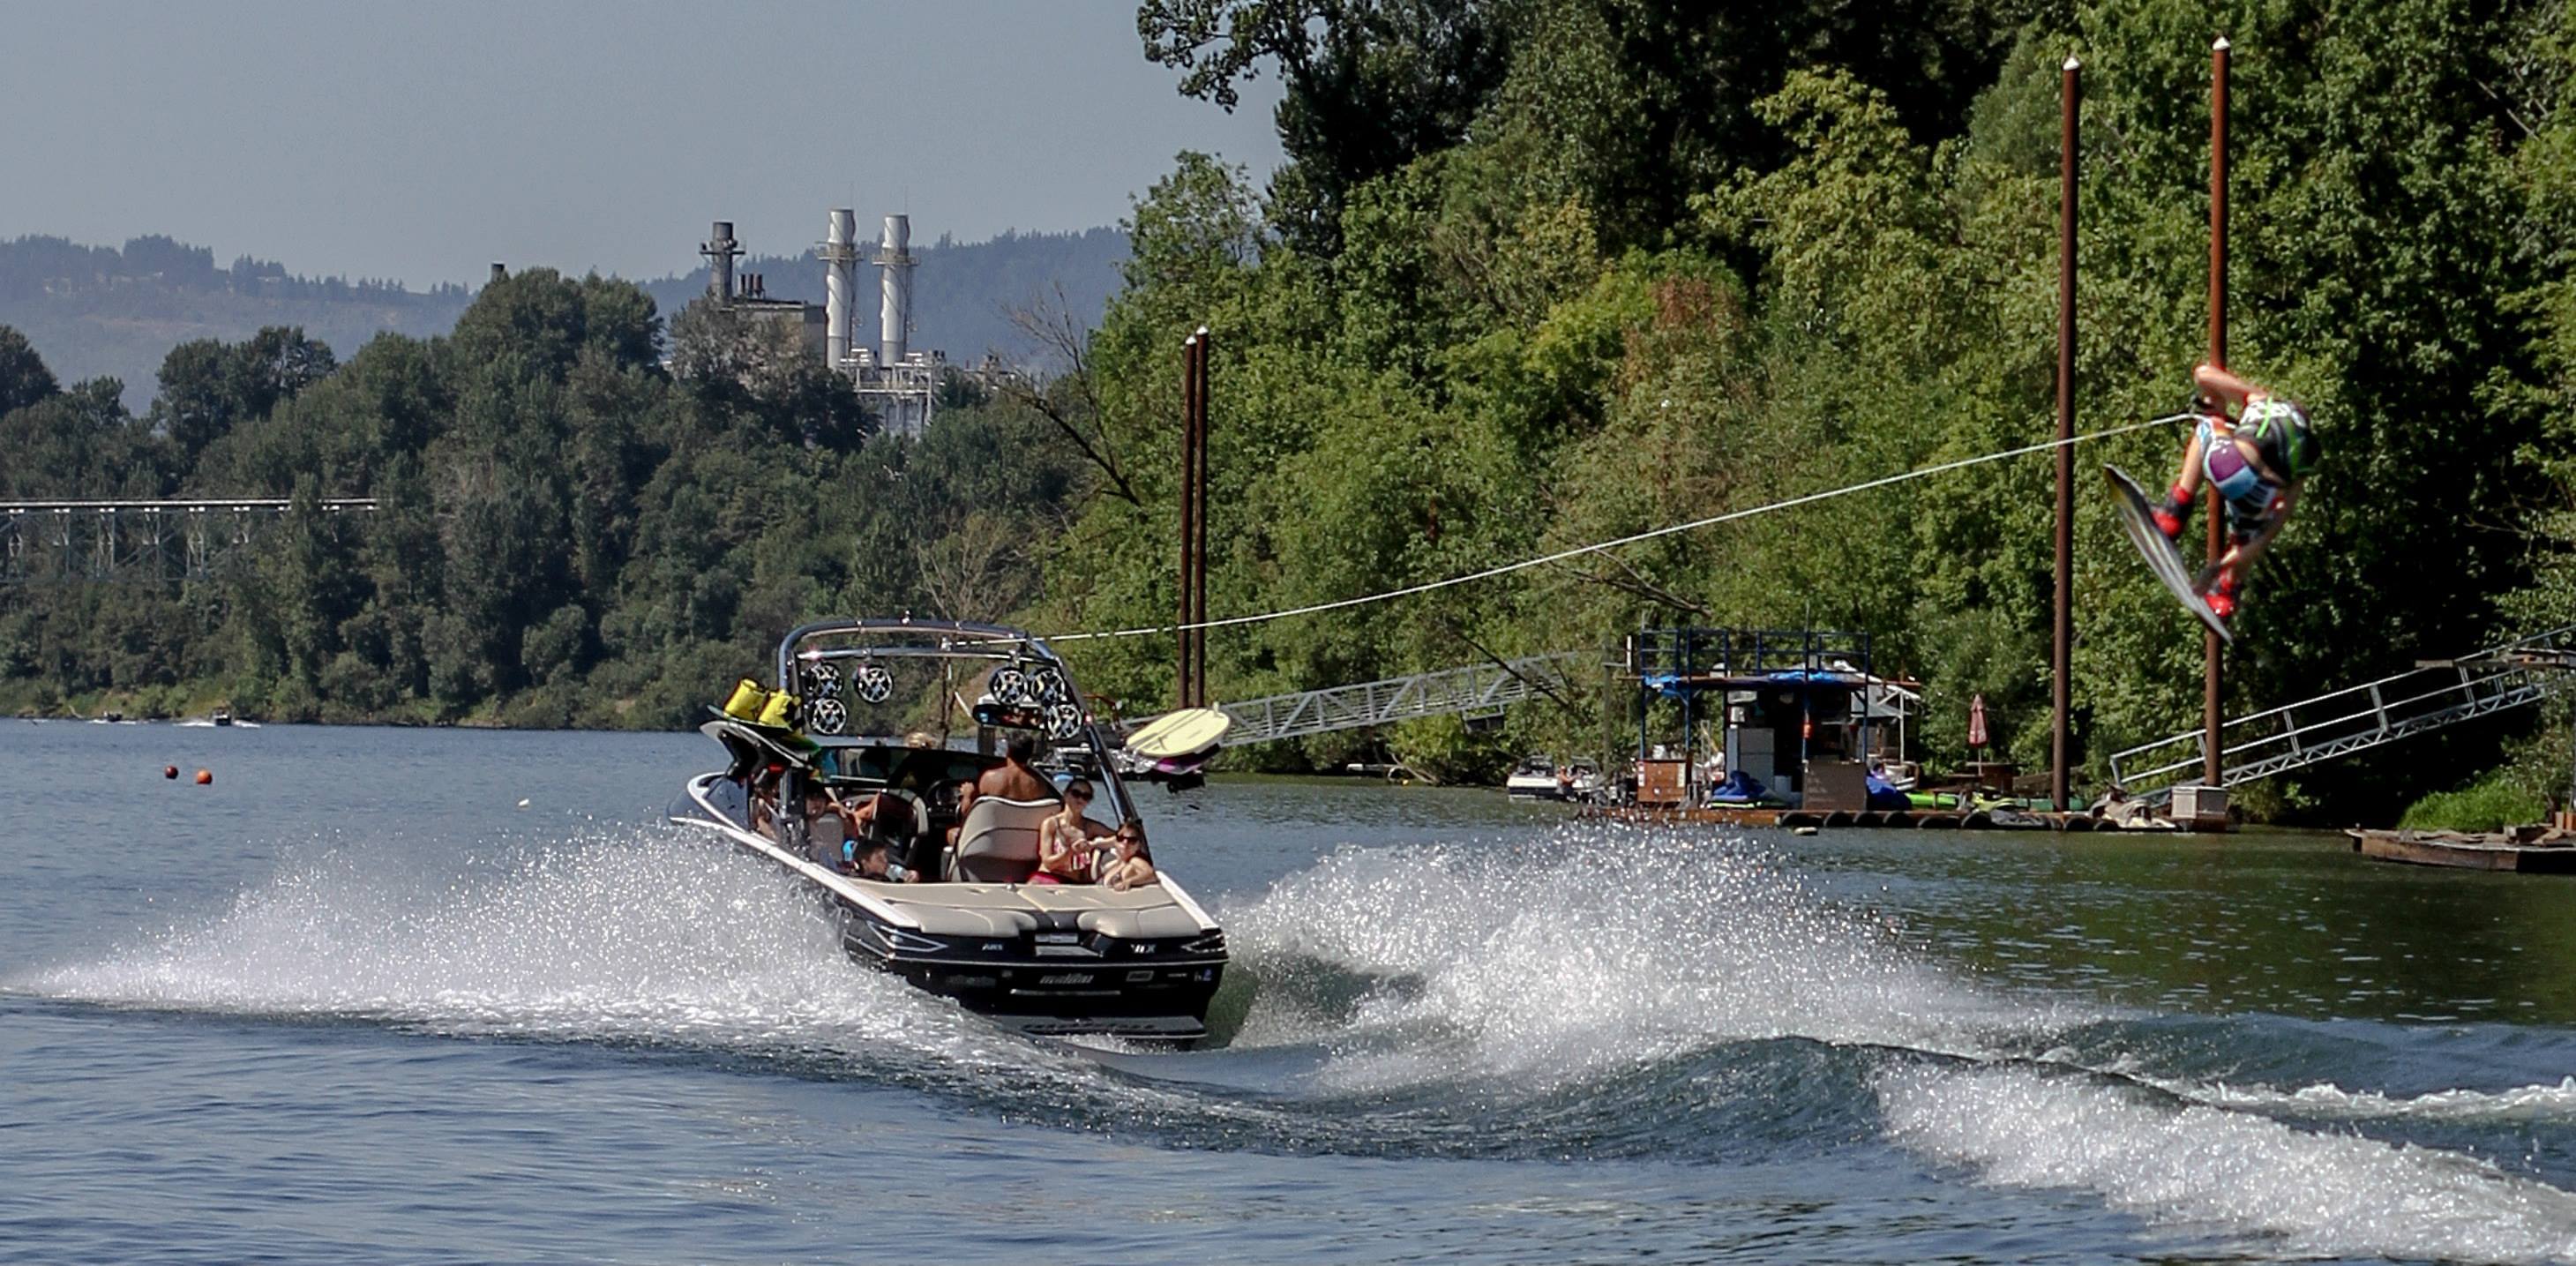 Wakeboarders enjoying the Willamette River for their sport